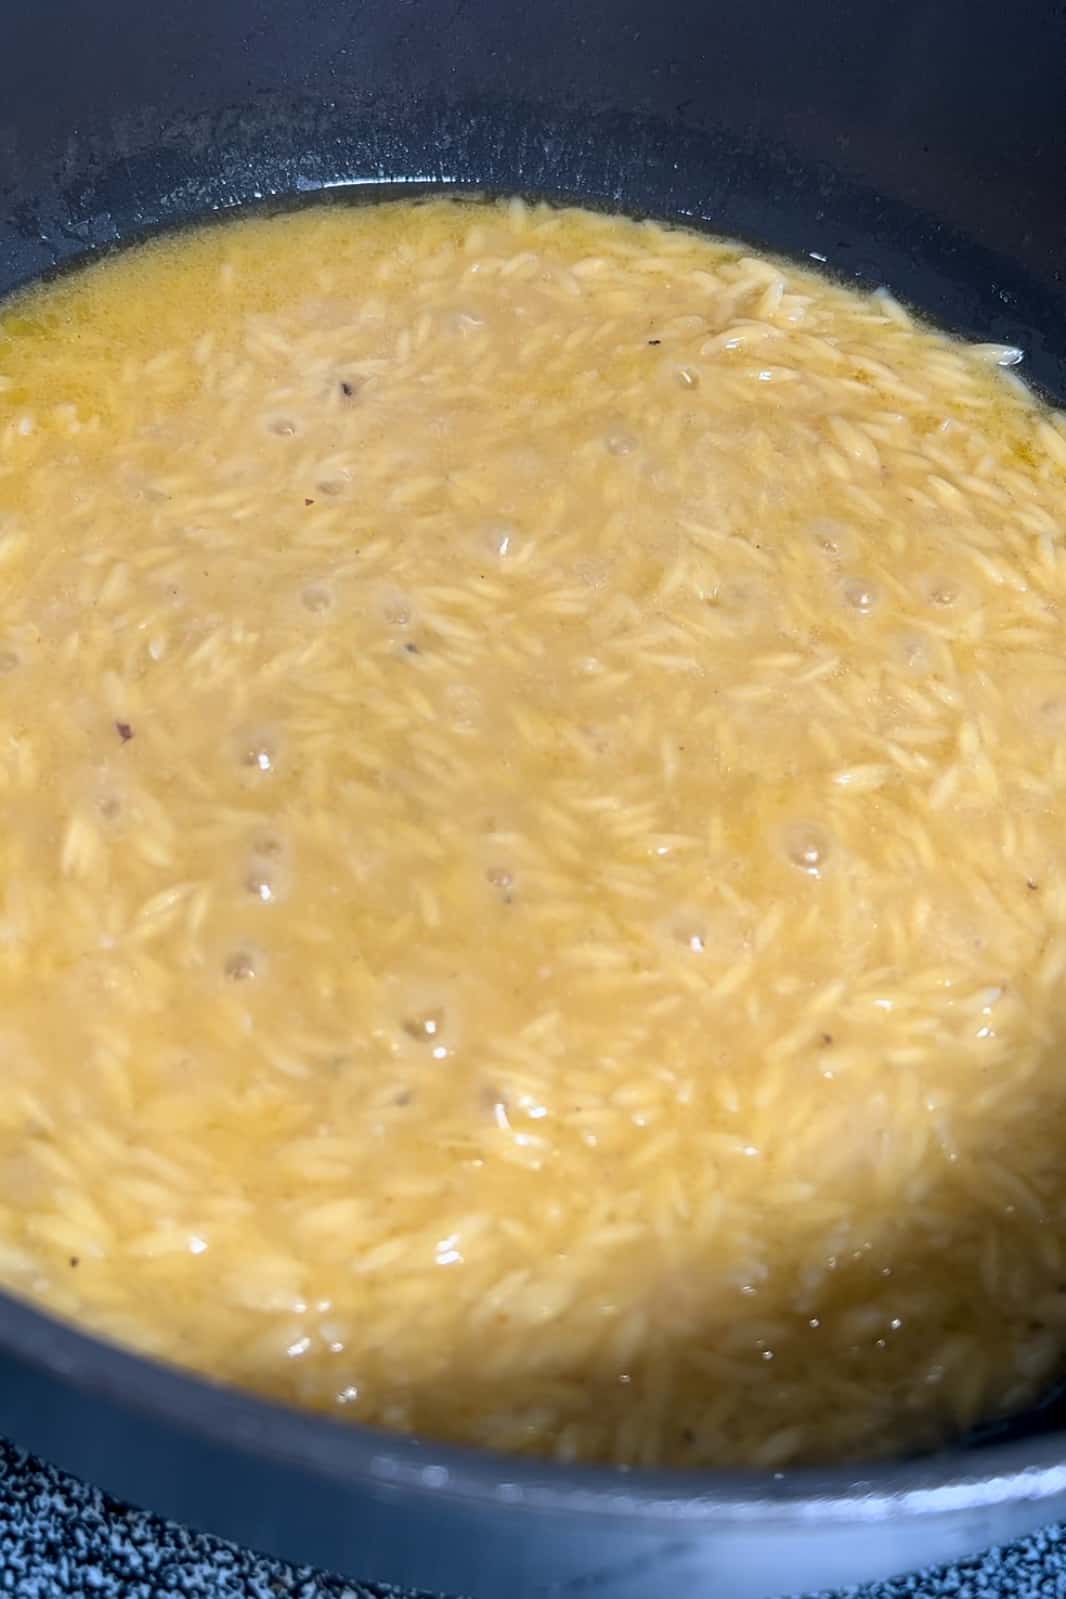 Cook Orzo: Once the chicken is cooked, remove the chicken from the pot and set it on a plate. Pour the remaining chicken drippings into a measuring bowl. Check the volume of the drippings and add store-bought chicken broth to make a total of 2 cups of liquid. Adjust the seasoning if needed. Bring the liquid to a simmer in the pot. Add 1 cup of orzo to the simmering liquid. Cook the orzo uncovered on medium heat for 8-12 minutes or as per the instructions on the orzo package. Stir occasionally until the orzo is soft and the liquid has evaporated.